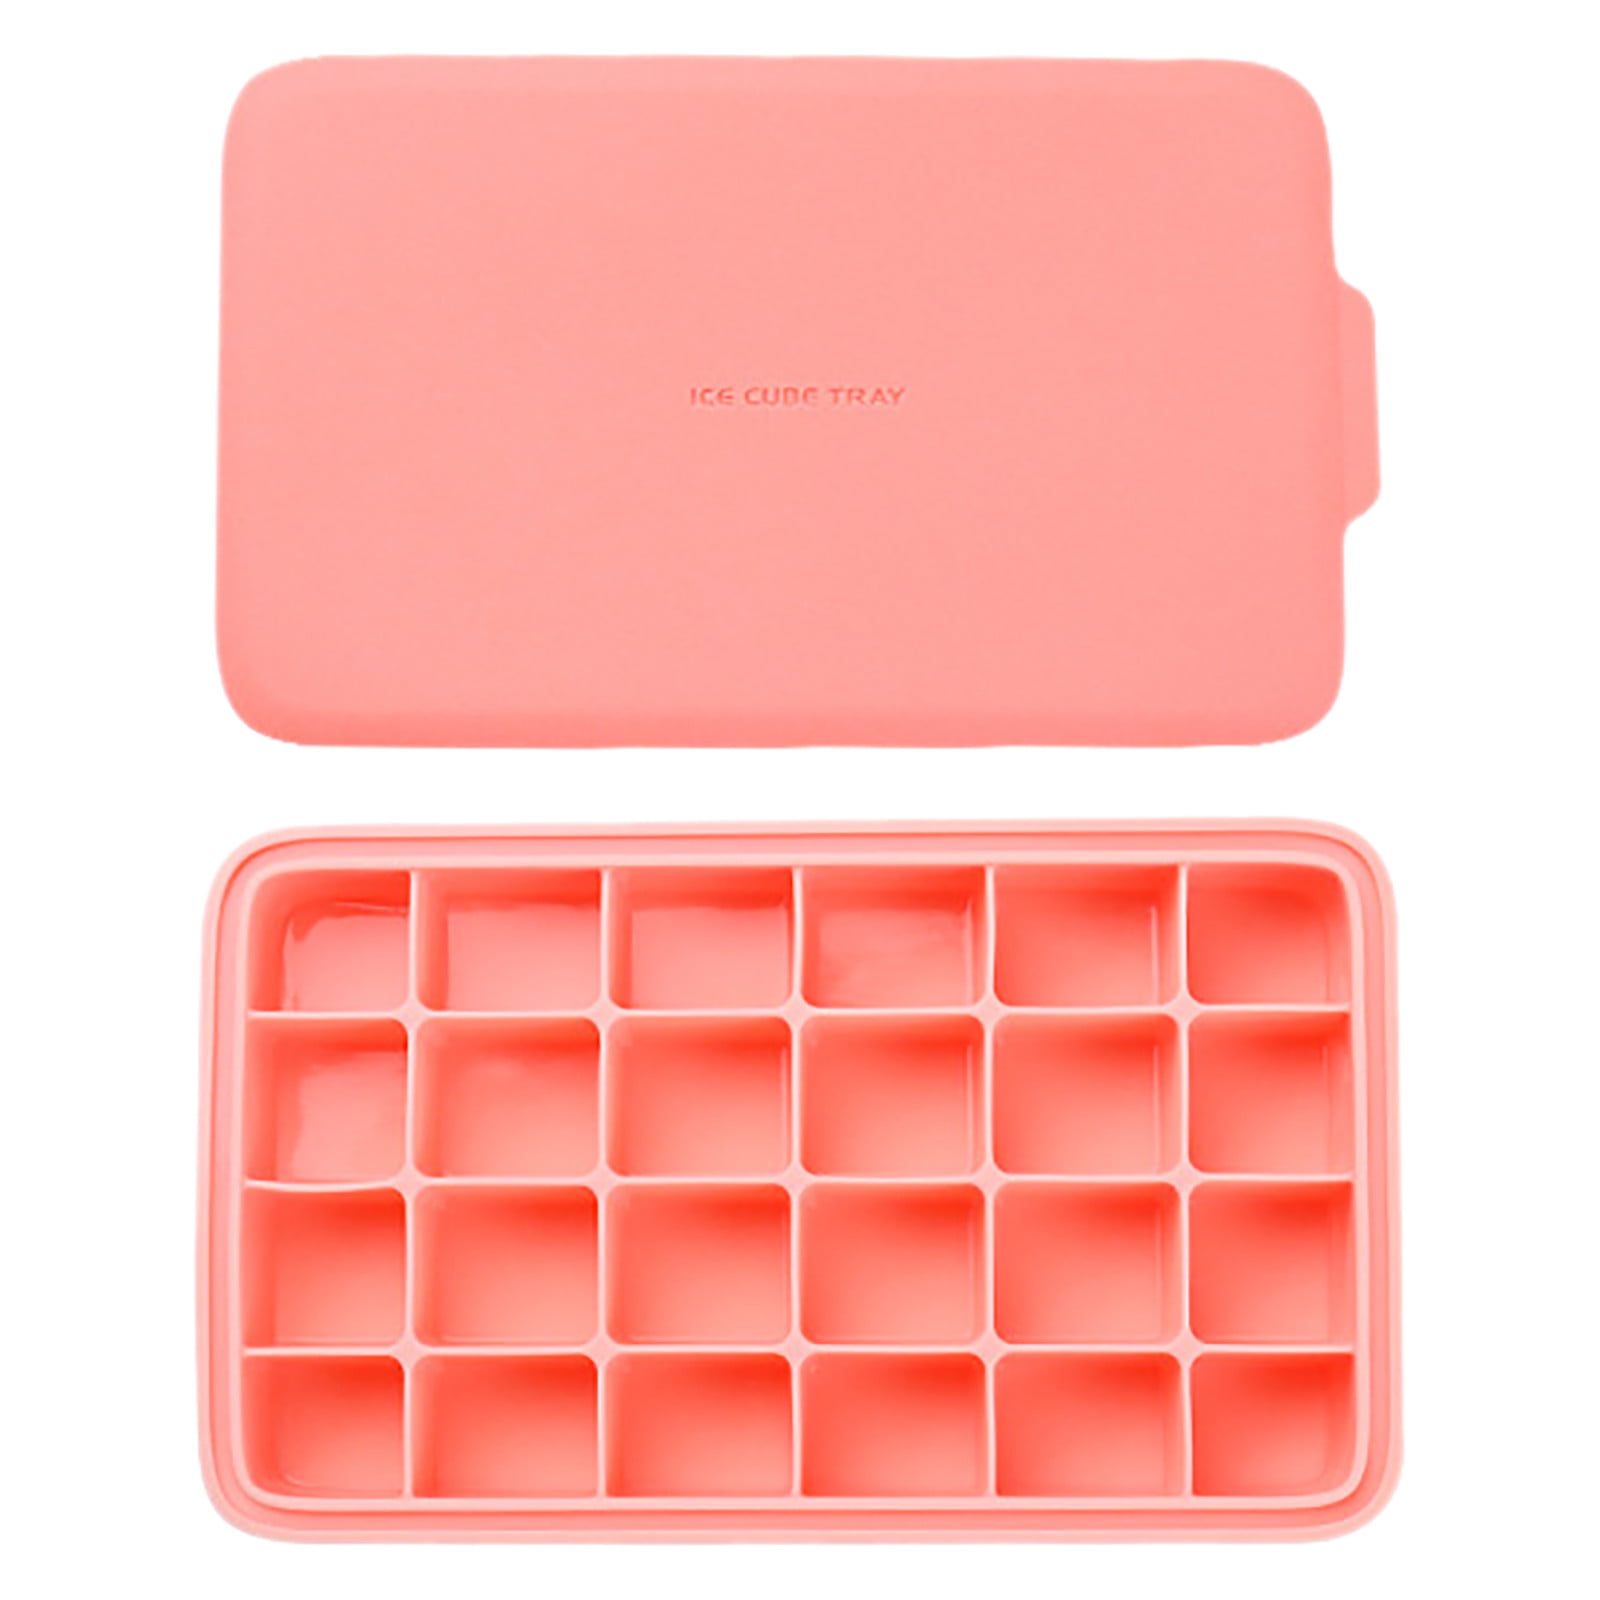 New Ice Cube Tray Easy Pop Out Maker Silicone/Plastic Top Mould Fast Dispatch 